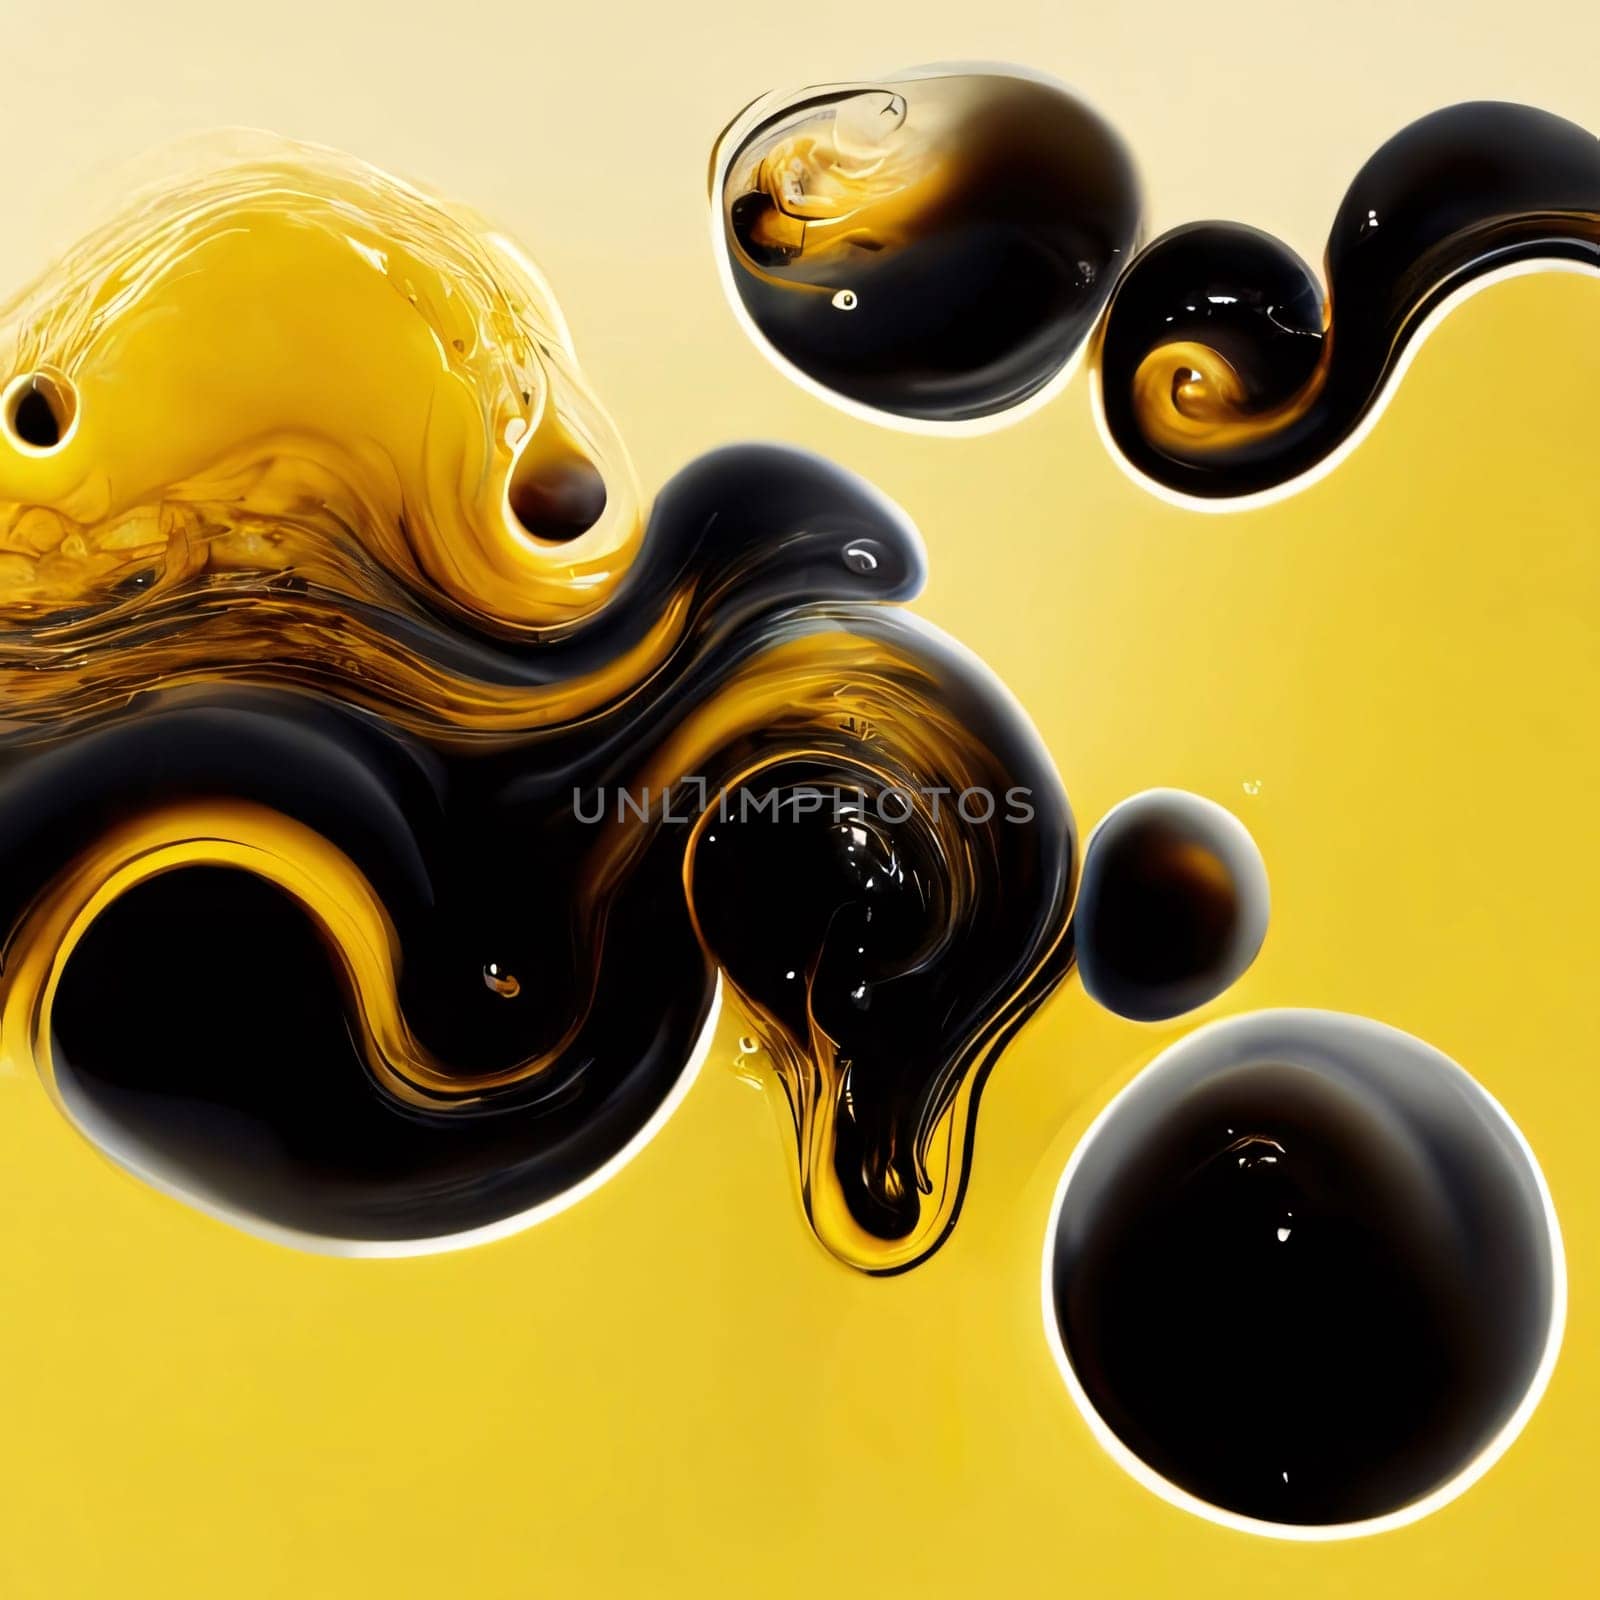 Abstract background design: abstract background of black and yellow oil splashes on yellow background